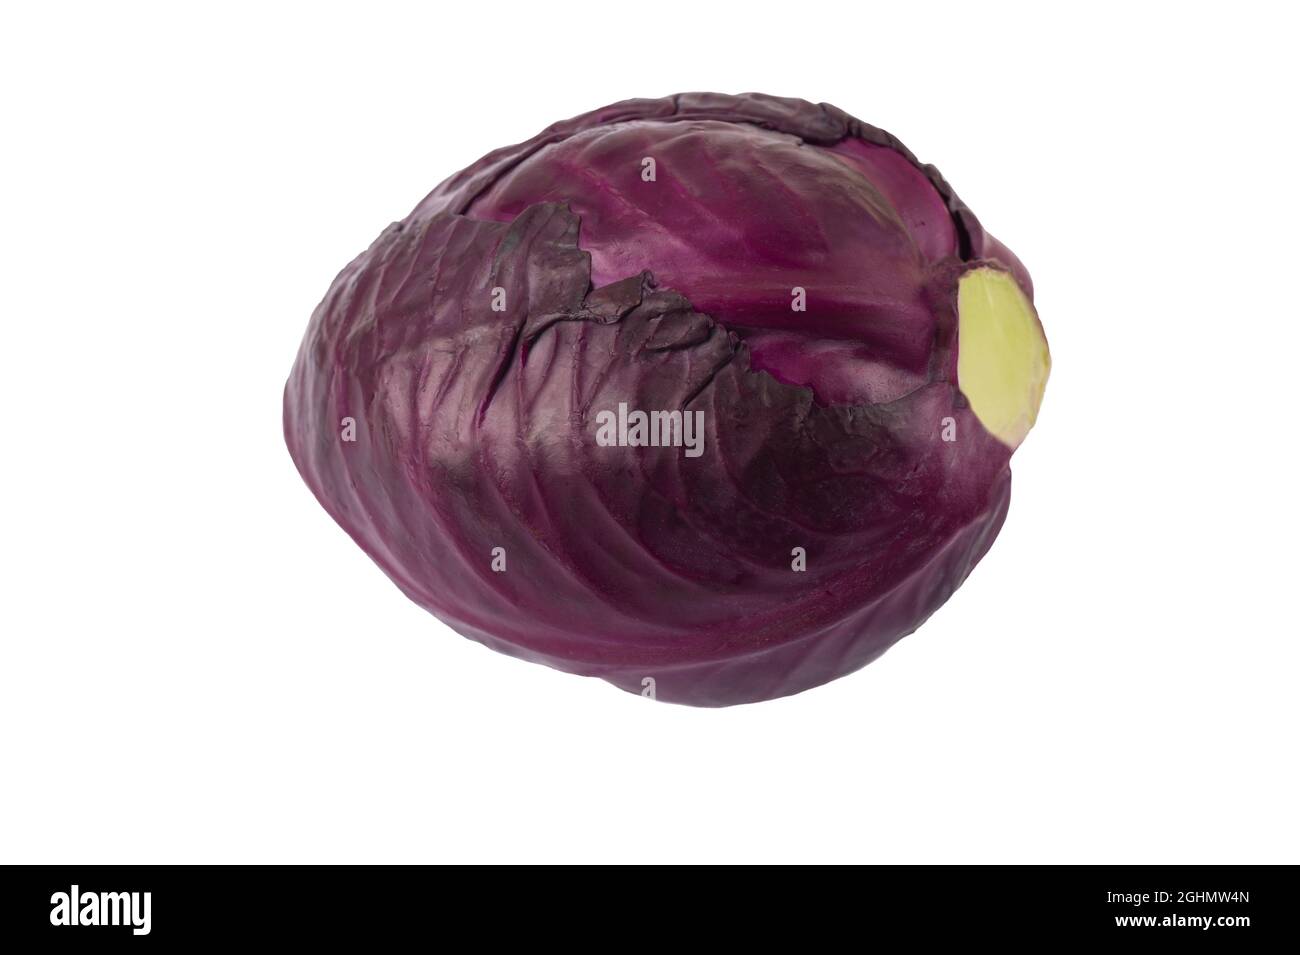 Raw organic red pointed cabbage isolated on white background. Stock Photo